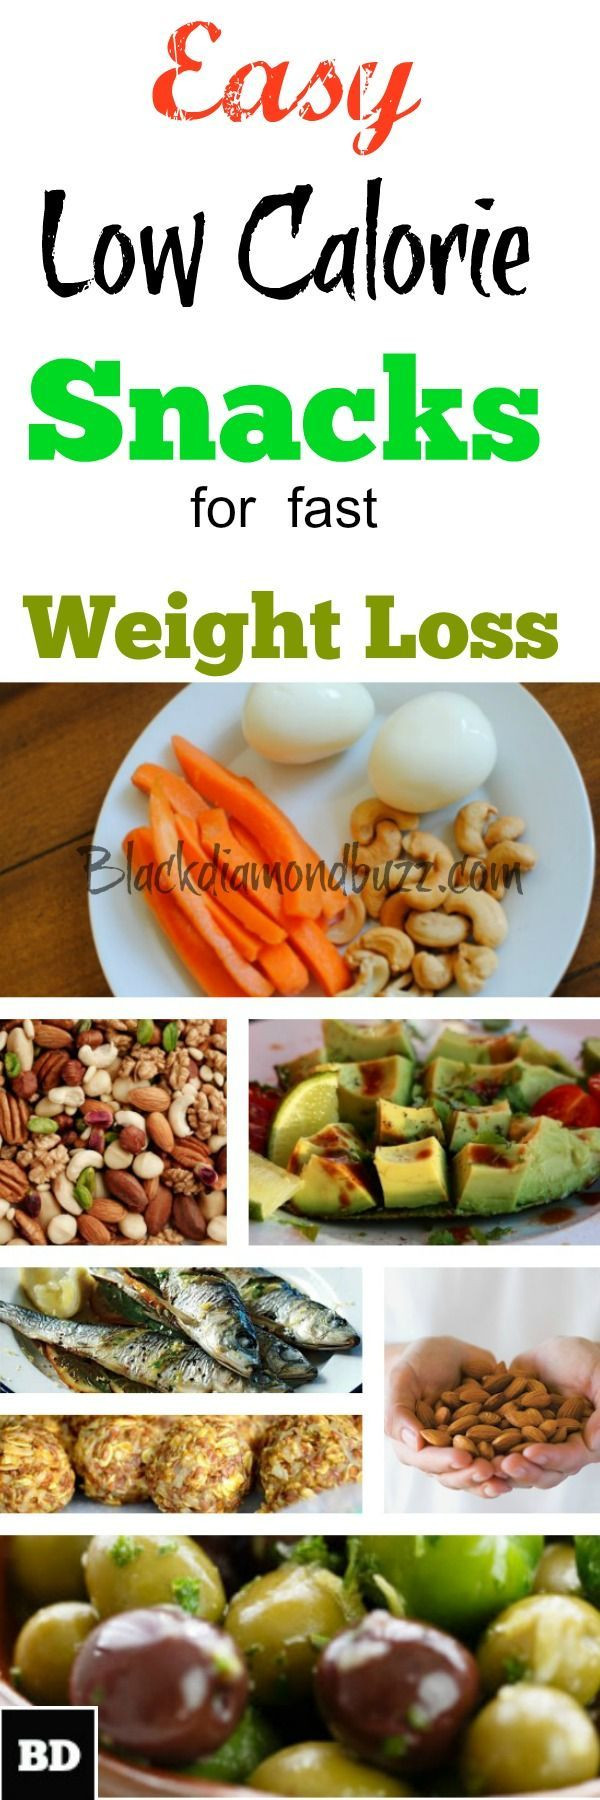 Healthy Weight Loss Snacks
 Best 25 Weight loss snacks ideas on Pinterest